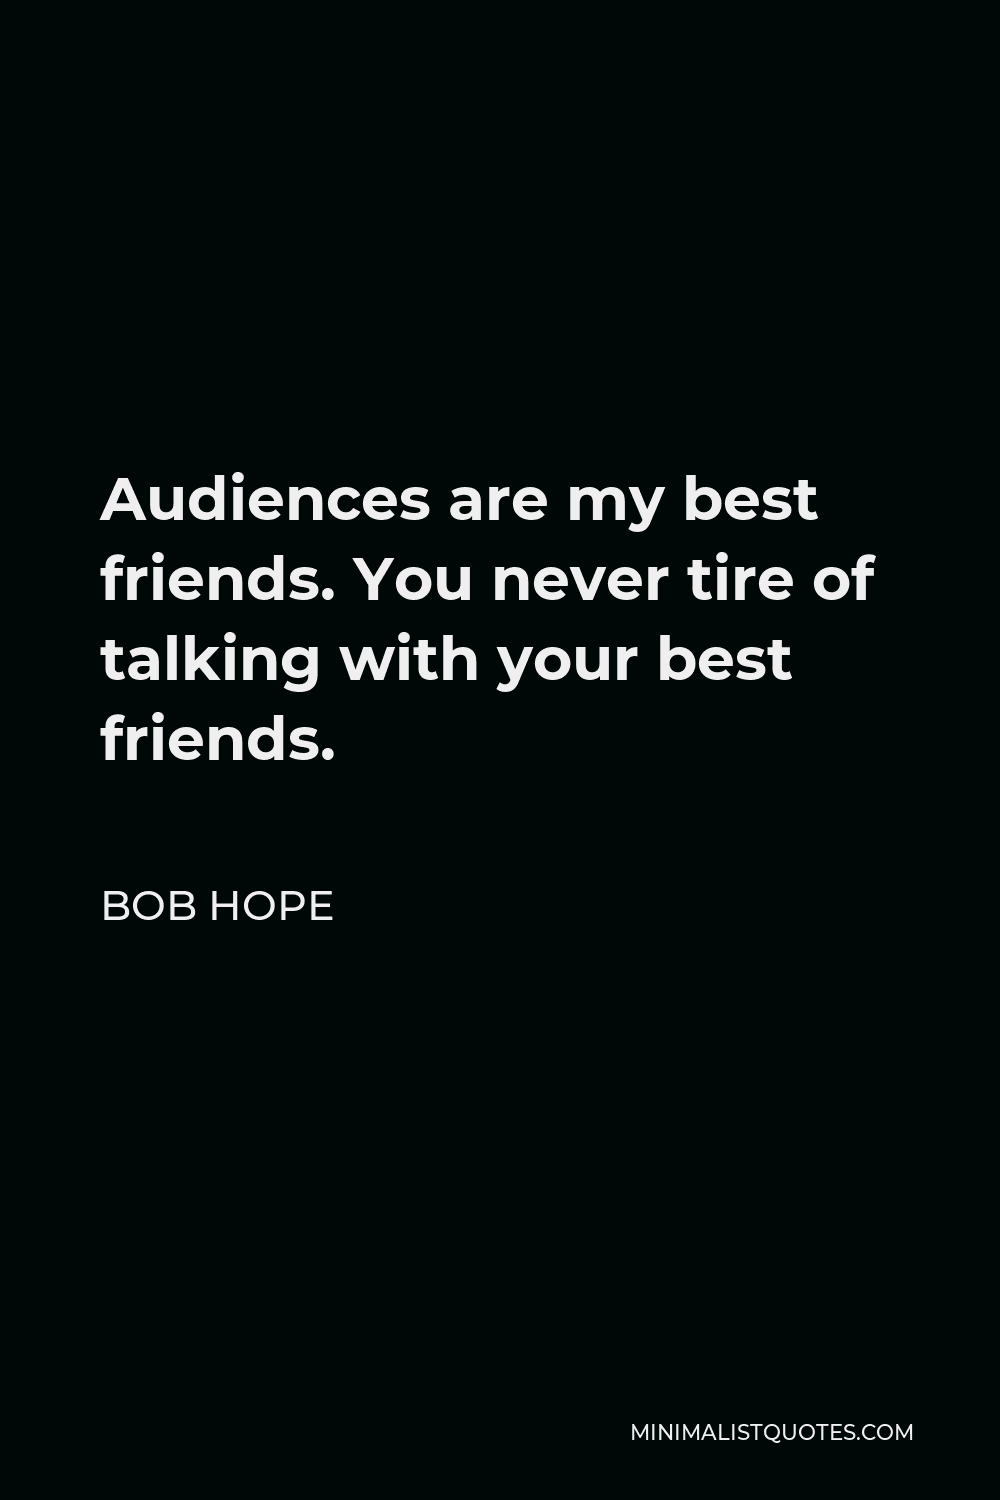 Bob Hope Quote - Audiences are my best friends. You never tire of talking with your best friends.